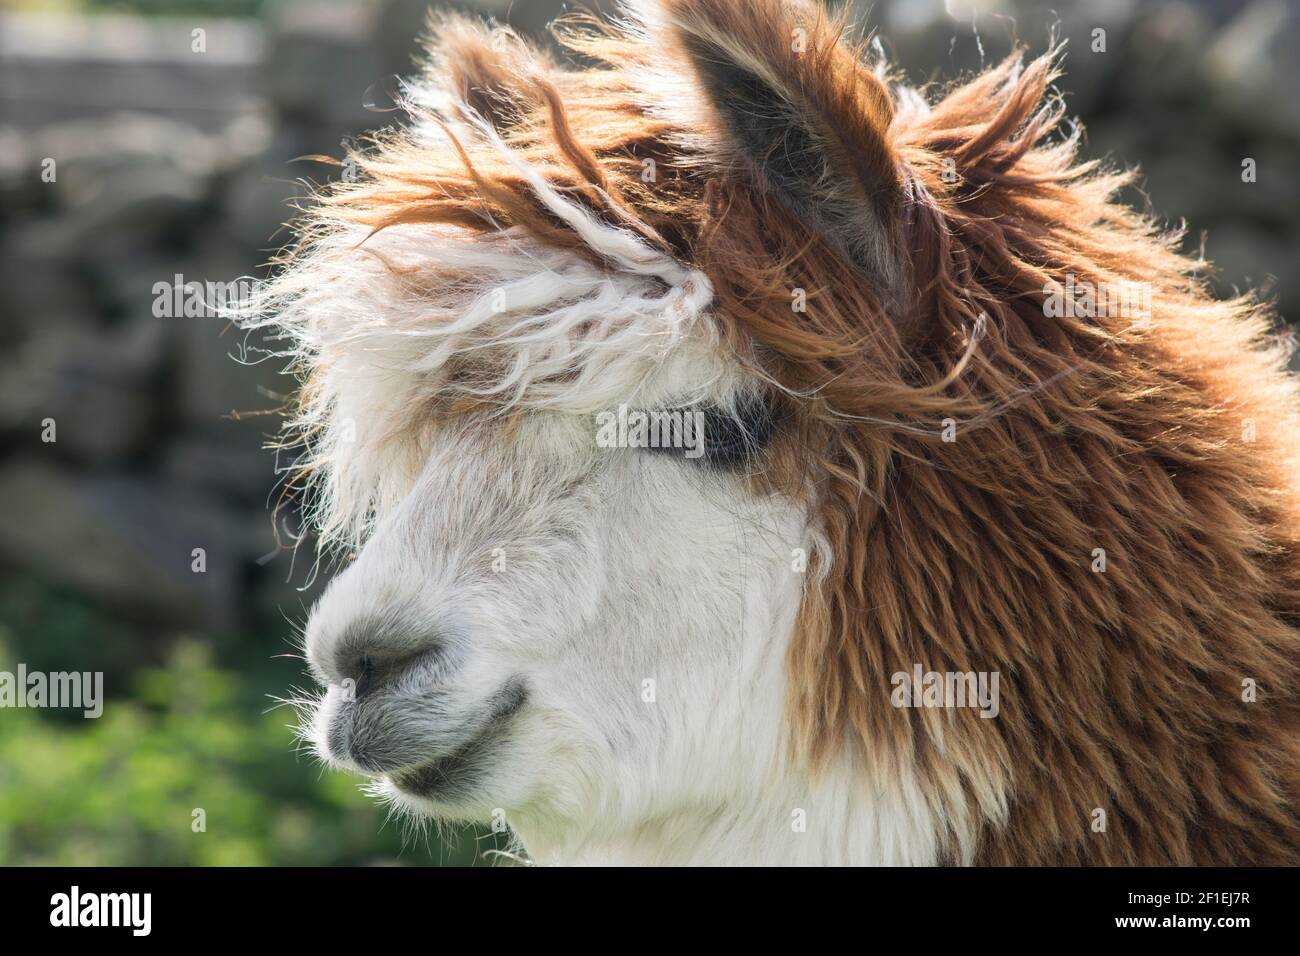 Brown and white shaggy alpaca in the sunshine Stock Photo